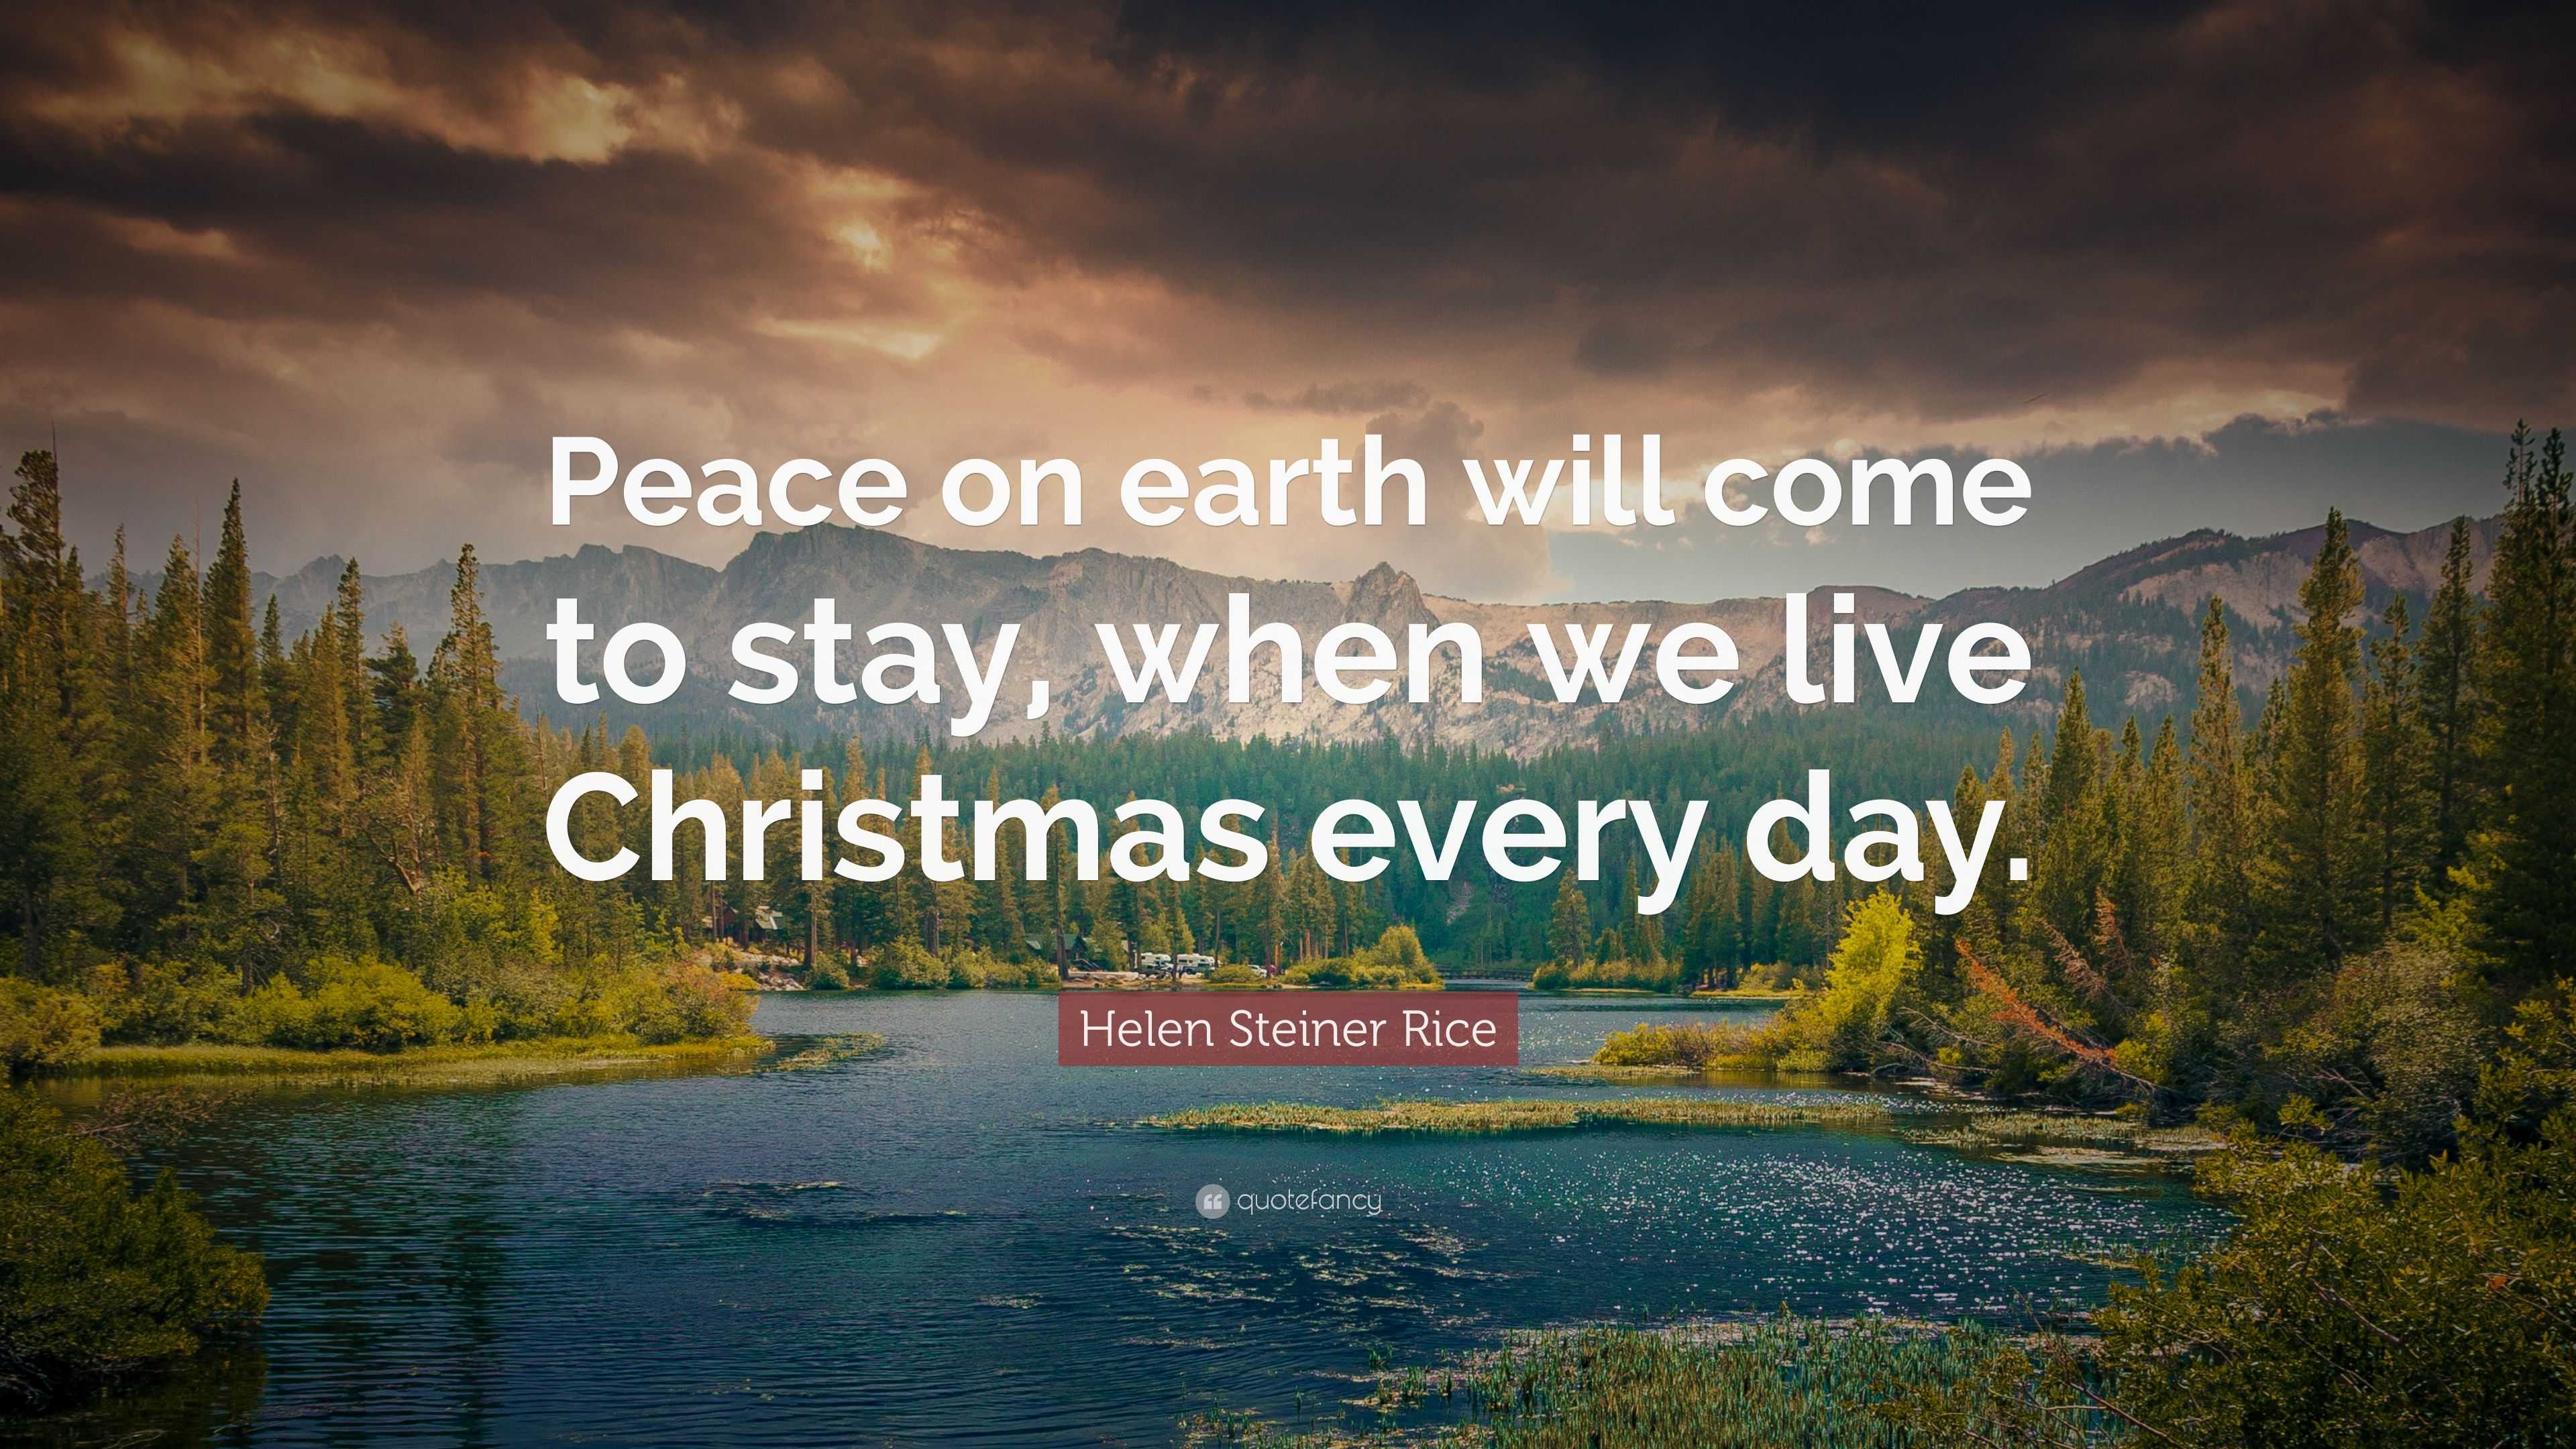 Helen Steiner Rice Quote: “Peace on earth will come to stay, when we ...